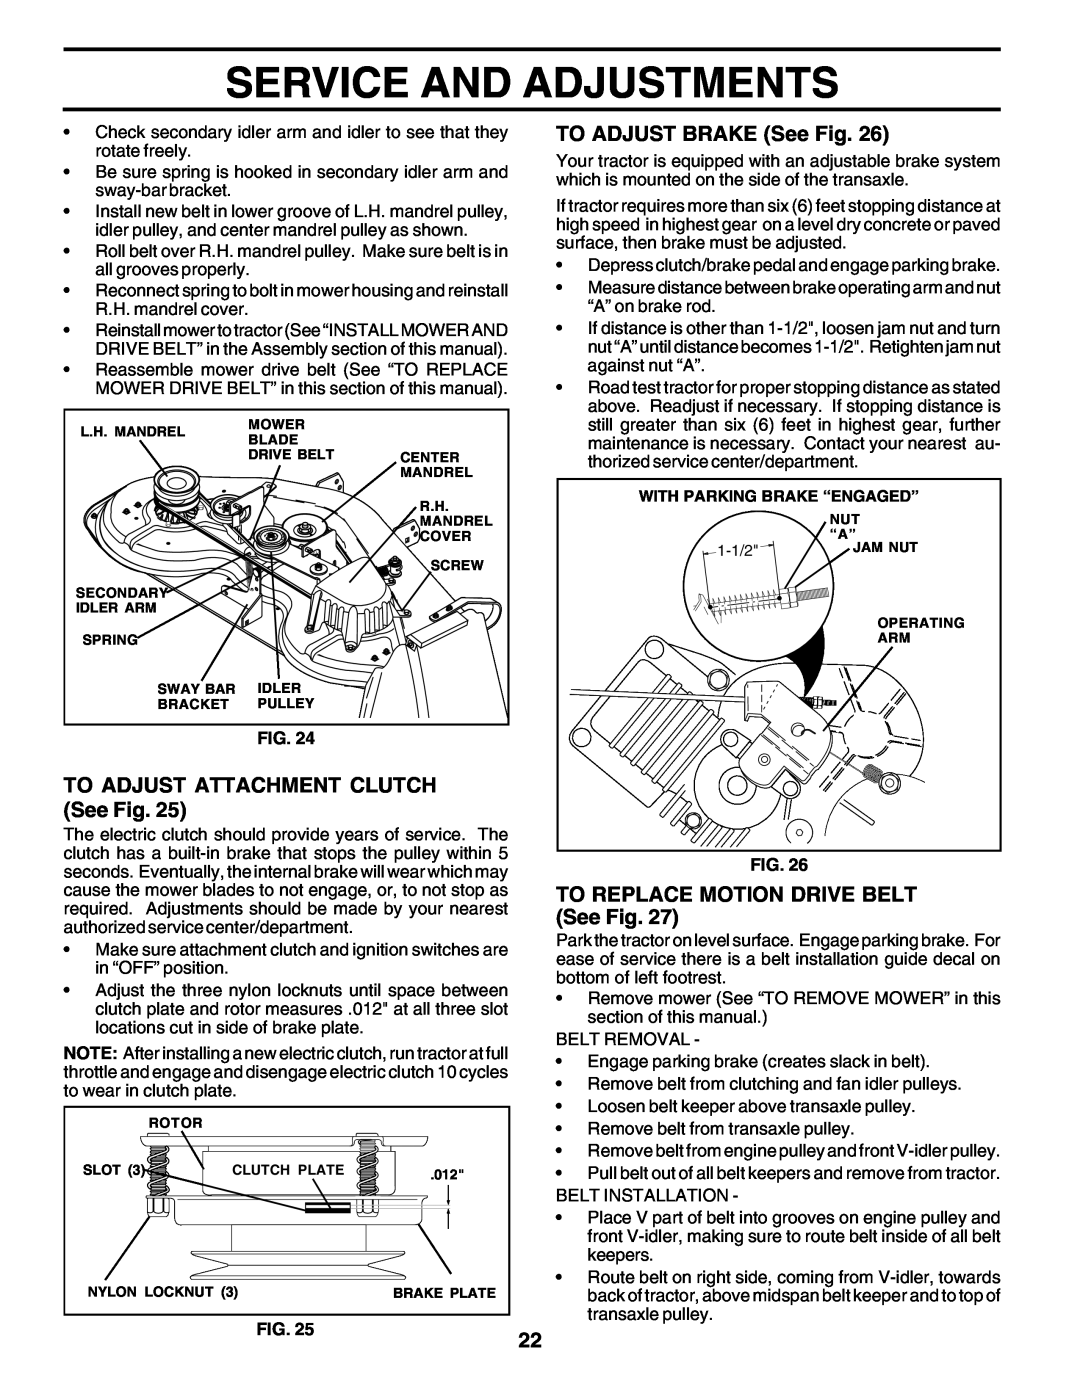 Poulan 176873 owner manual Service And Adjustments, TO ADJUST ATTACHMENT CLUTCH See Fig, TO ADJUST BRAKE See Fig, 1-1/2 